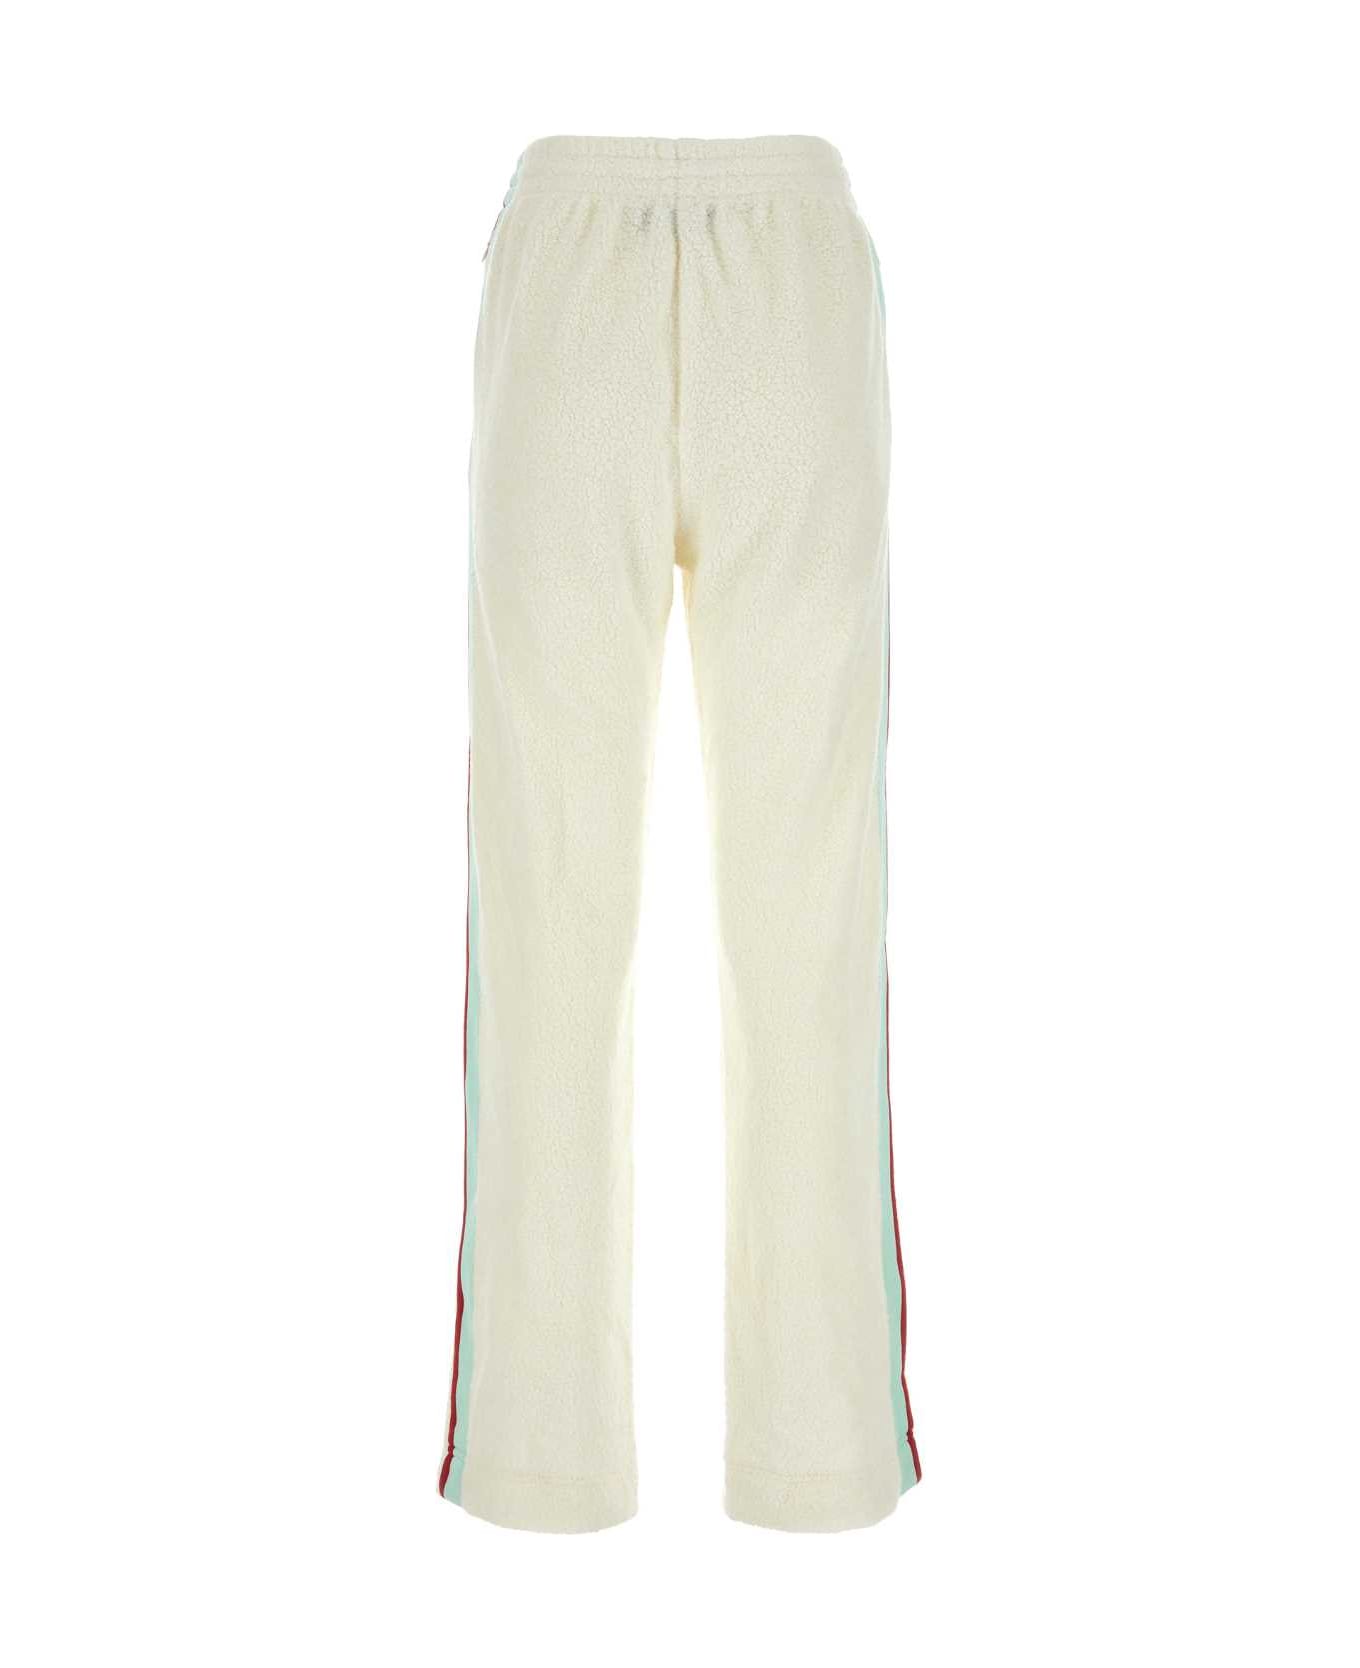 Casablanca Ivory Terry Fabric Joggers - OFFWHITE